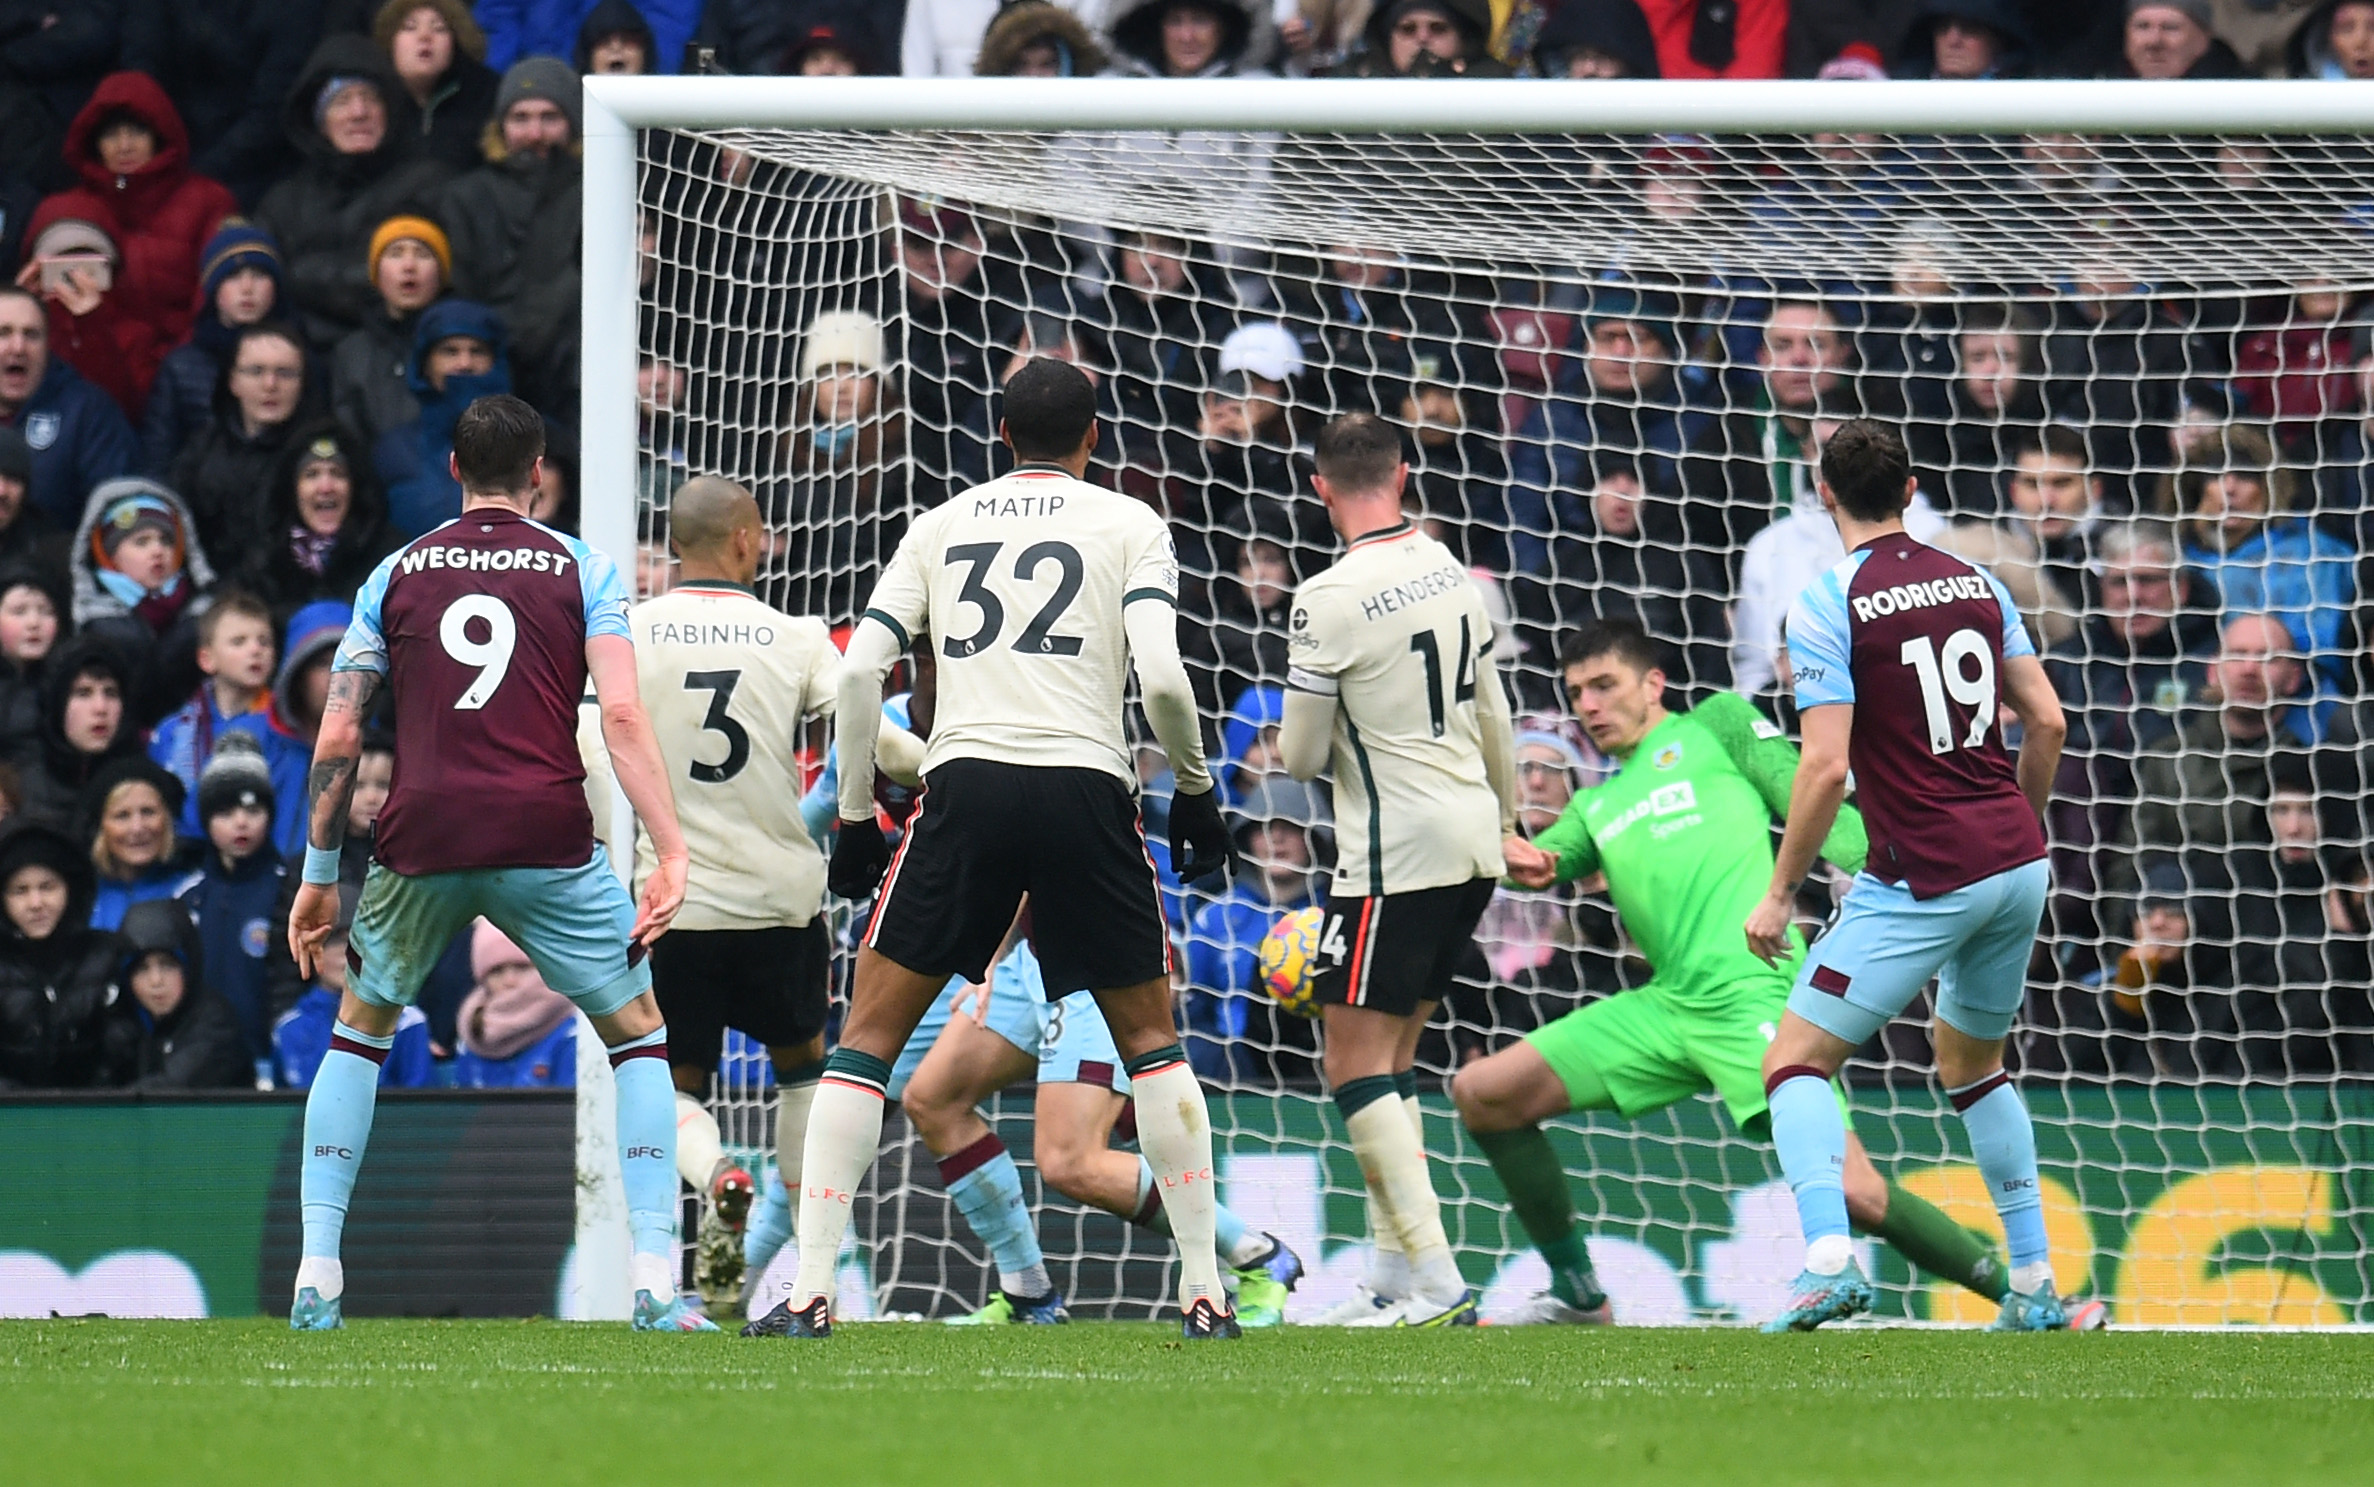 Burnley 0-1 Liverpool Highlights: Liverpool close the gap on Manchester City as they beat Burnley 1-0 courtesy of Fabinho's close-range strike